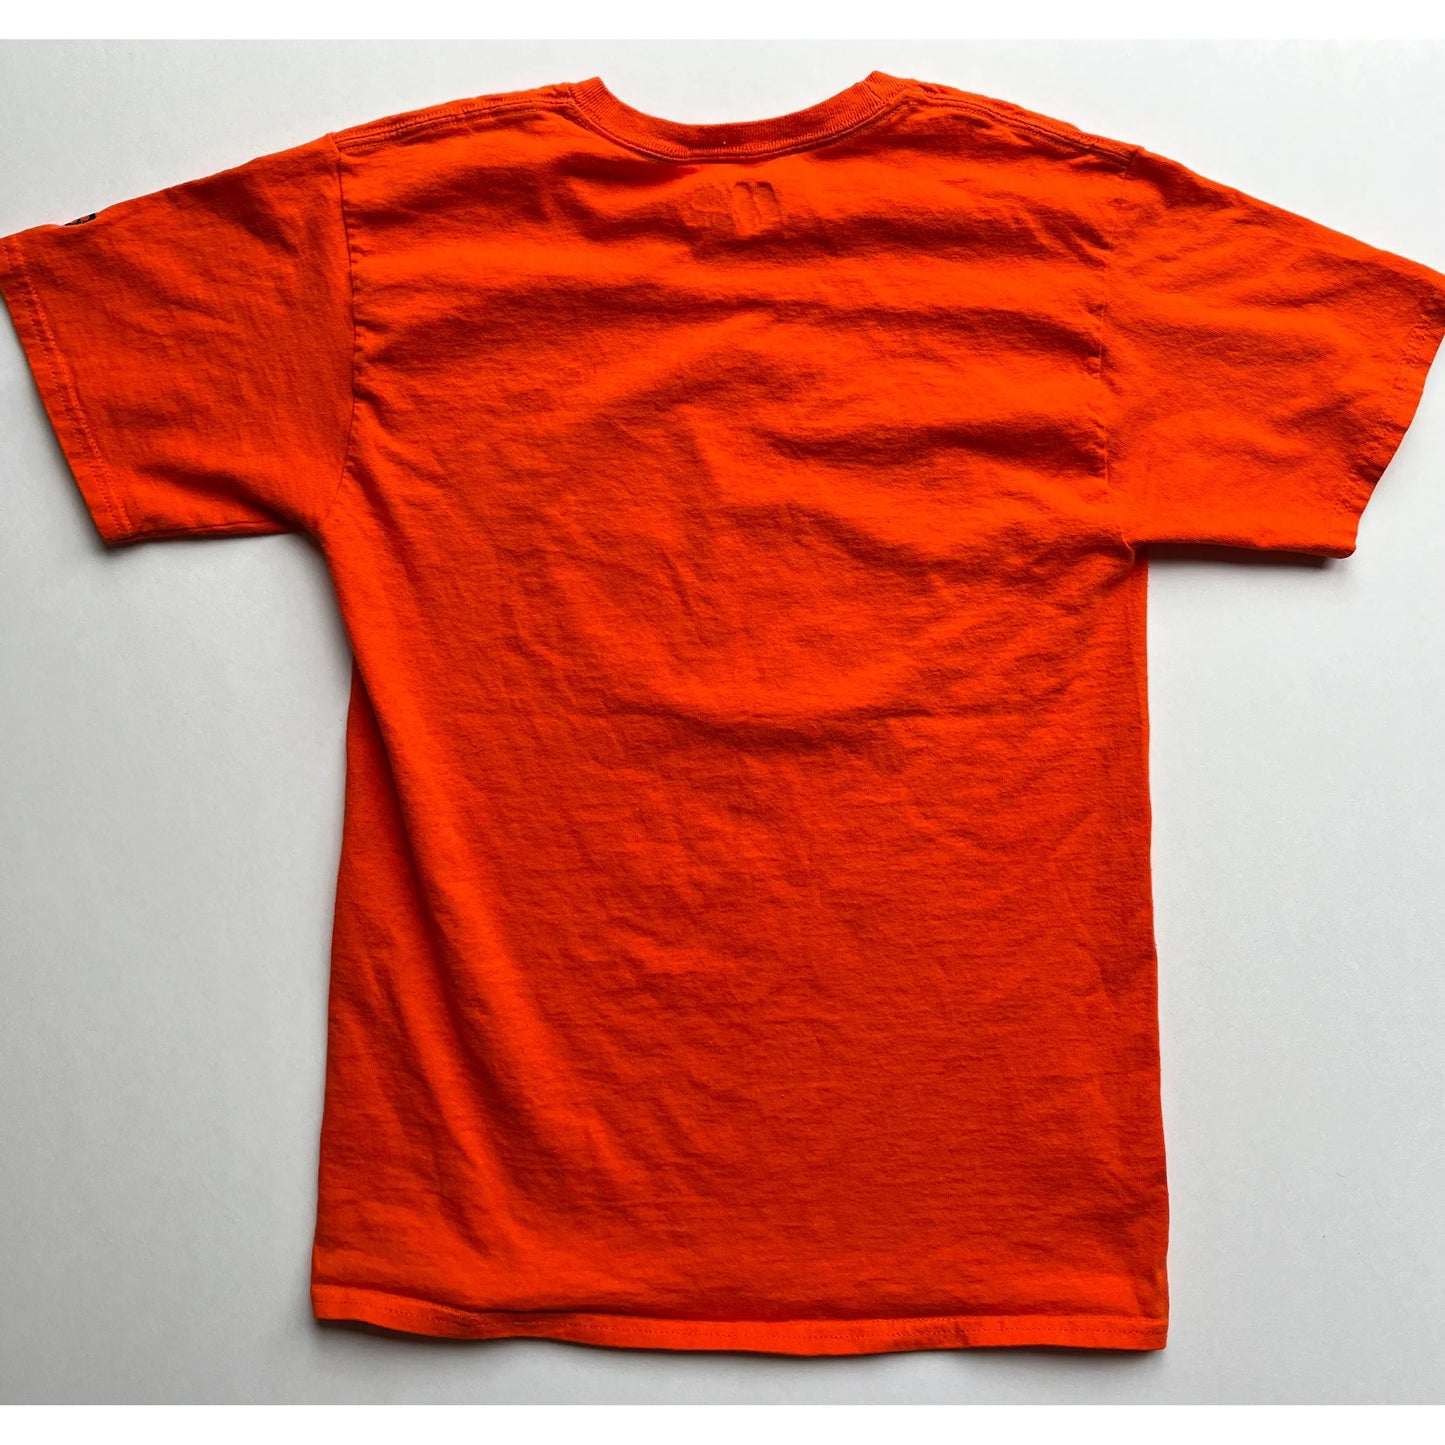 Clemson University - Russell Athletic Tee (Small)